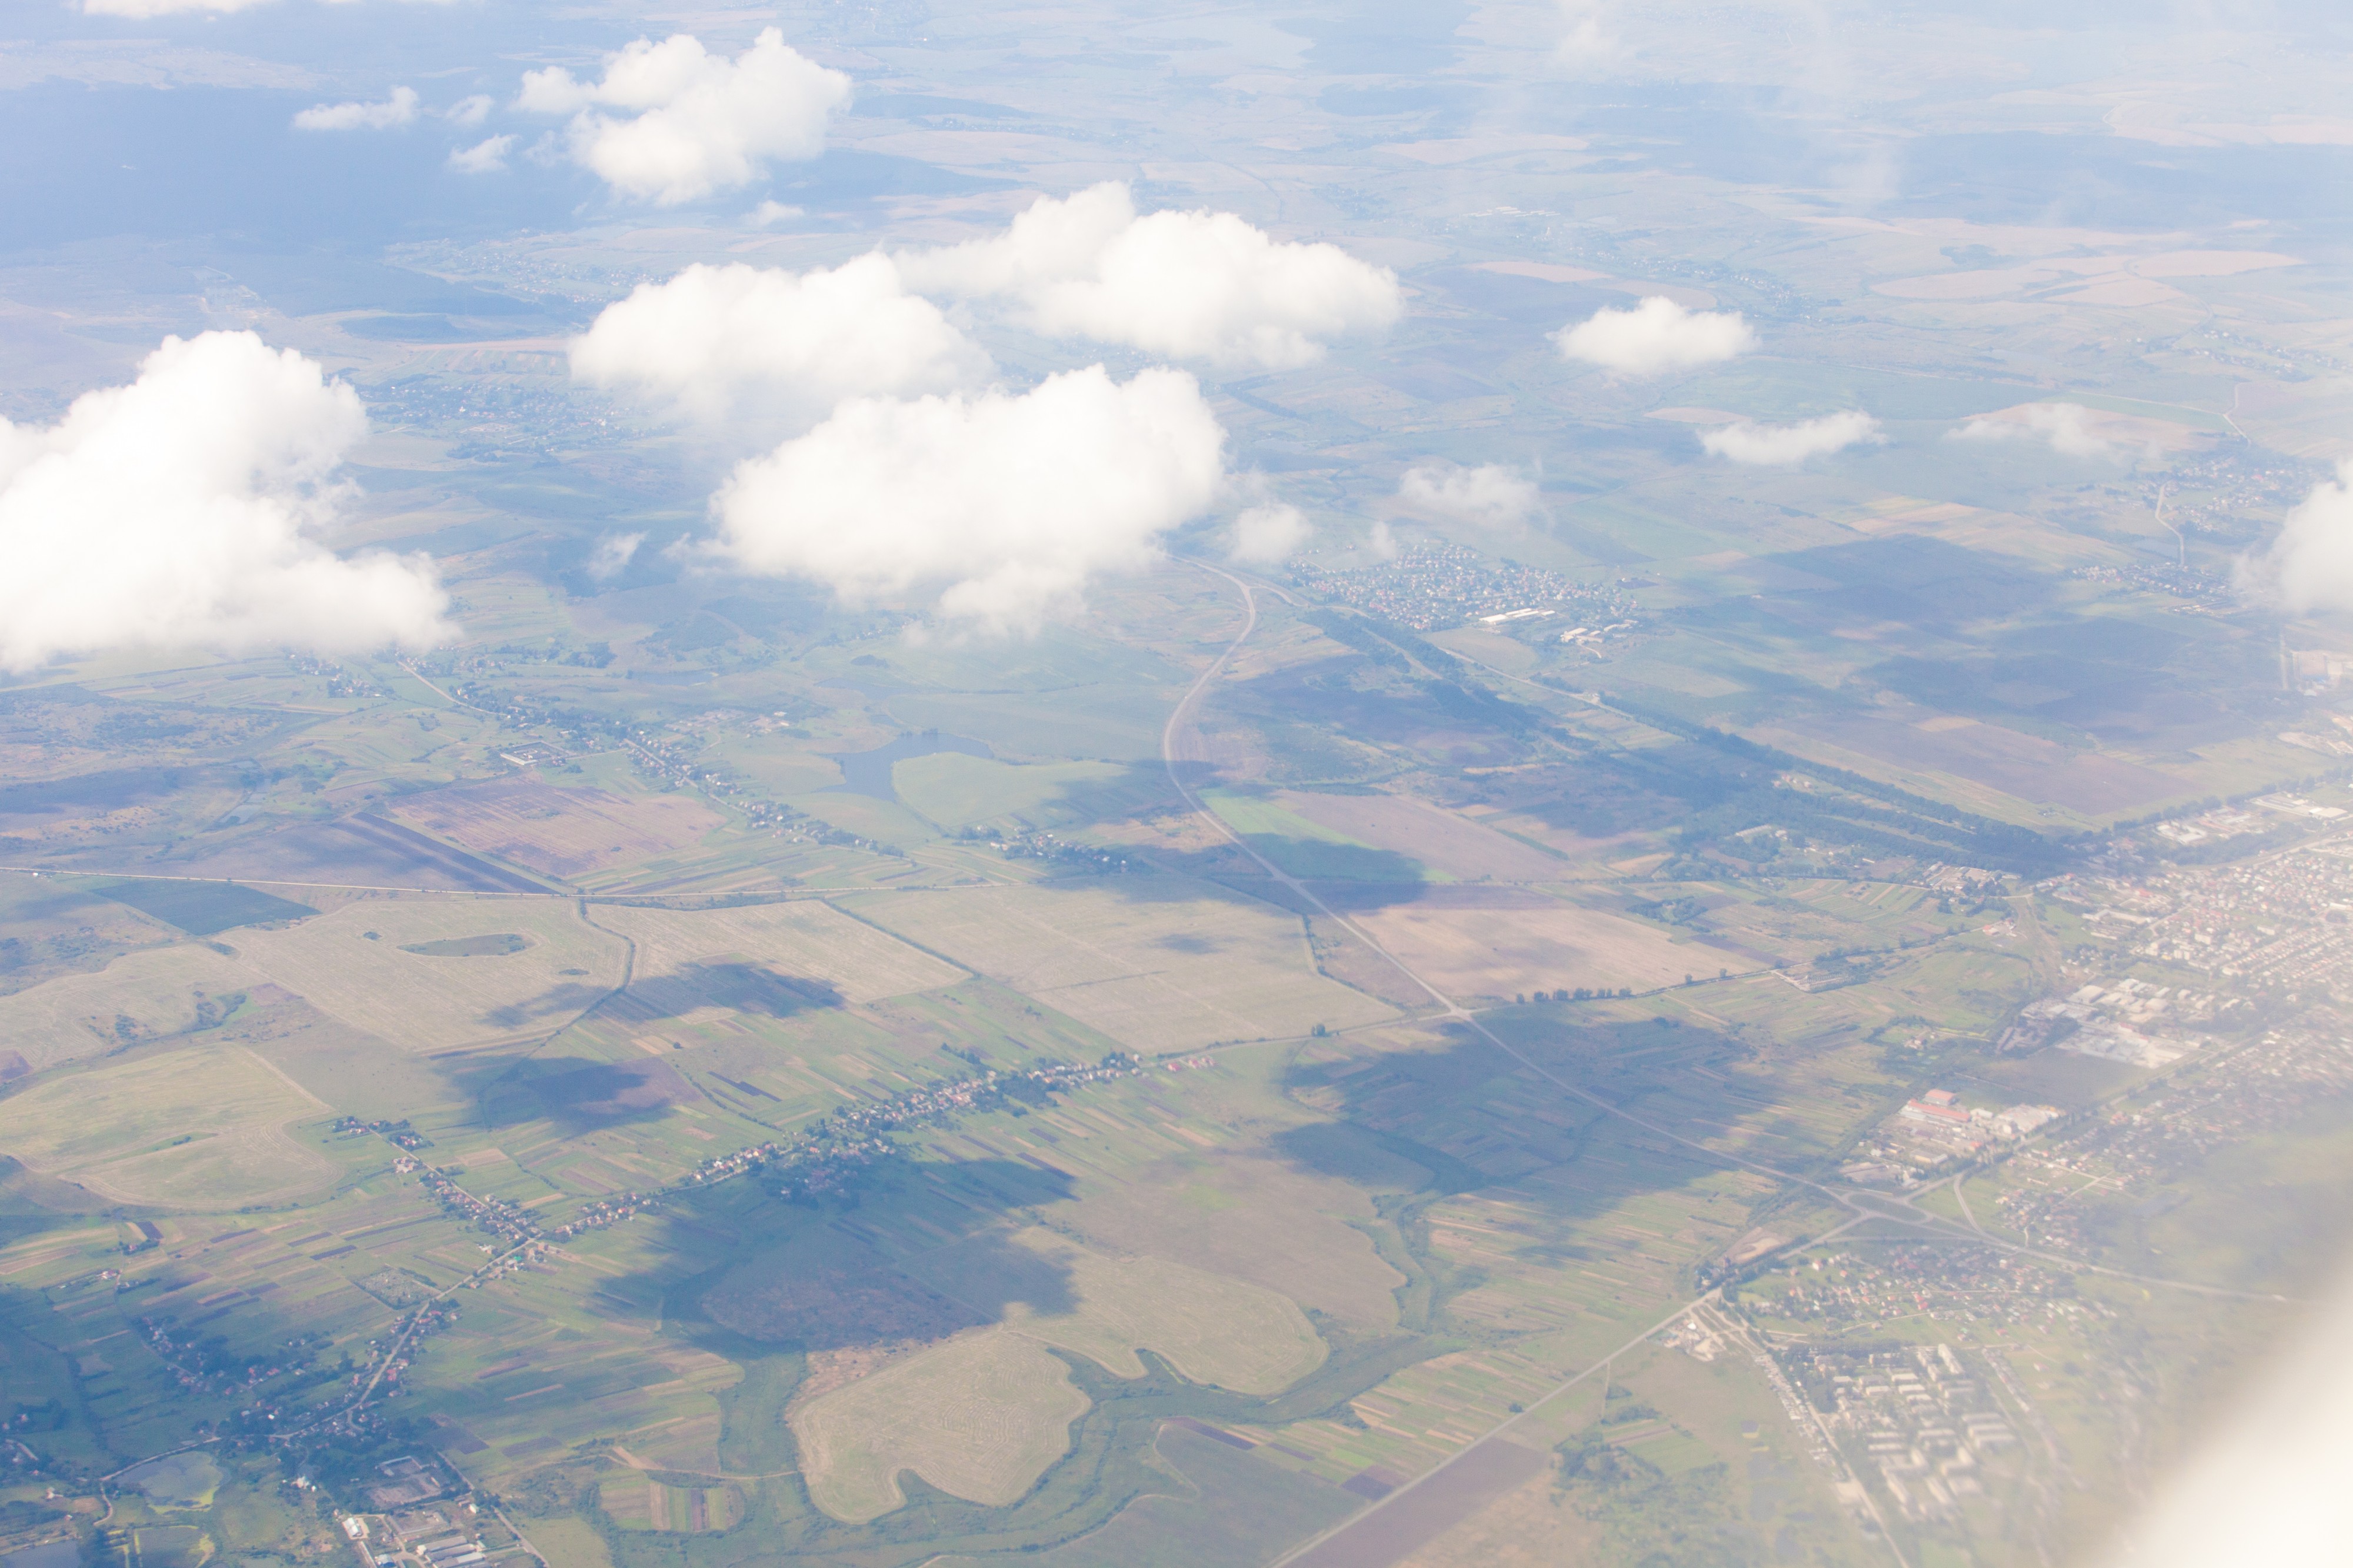 Earth from an airplane somewhere between Lviv and Tivat in August 2014, picture 1